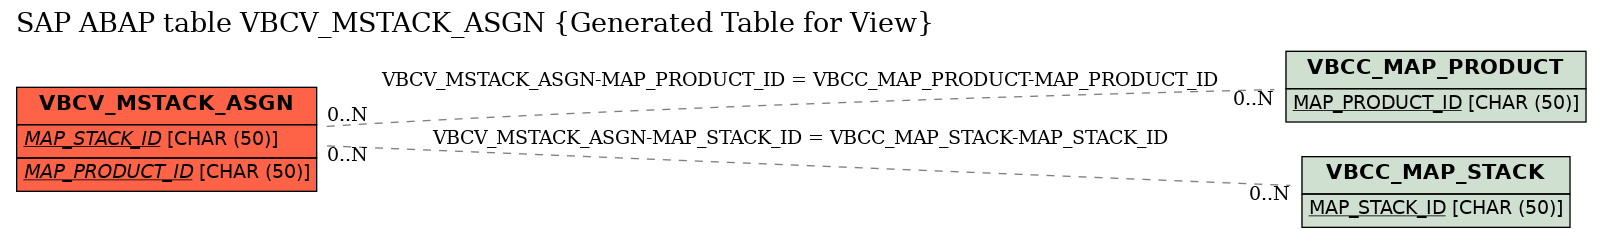 E-R Diagram for table VBCV_MSTACK_ASGN (Generated Table for View)